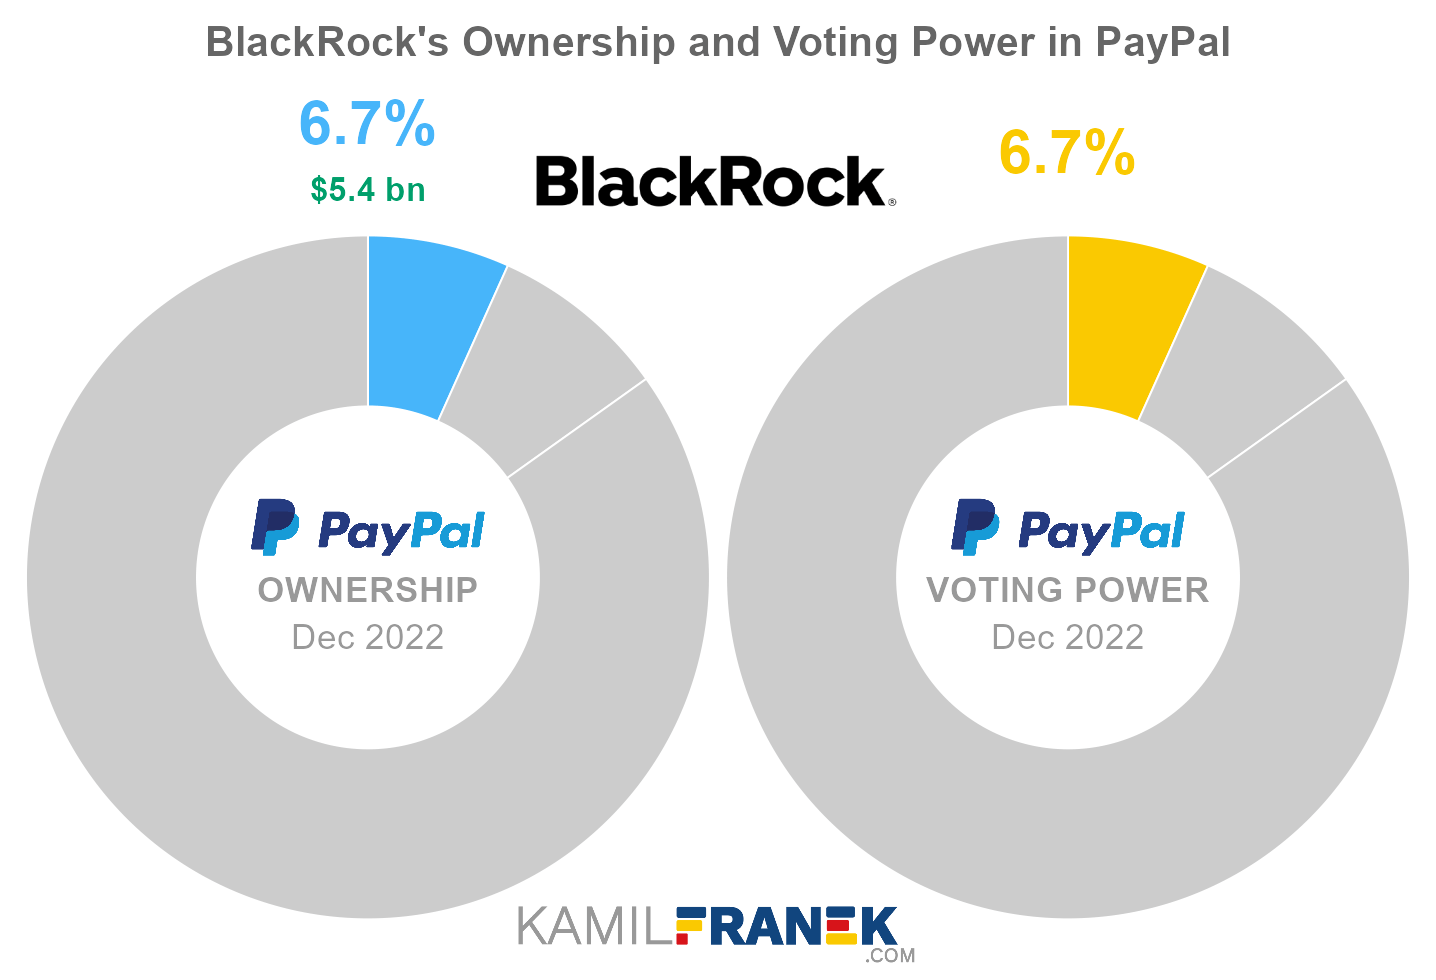 BlackRock's share ownership and voting power in PayPal (chart)